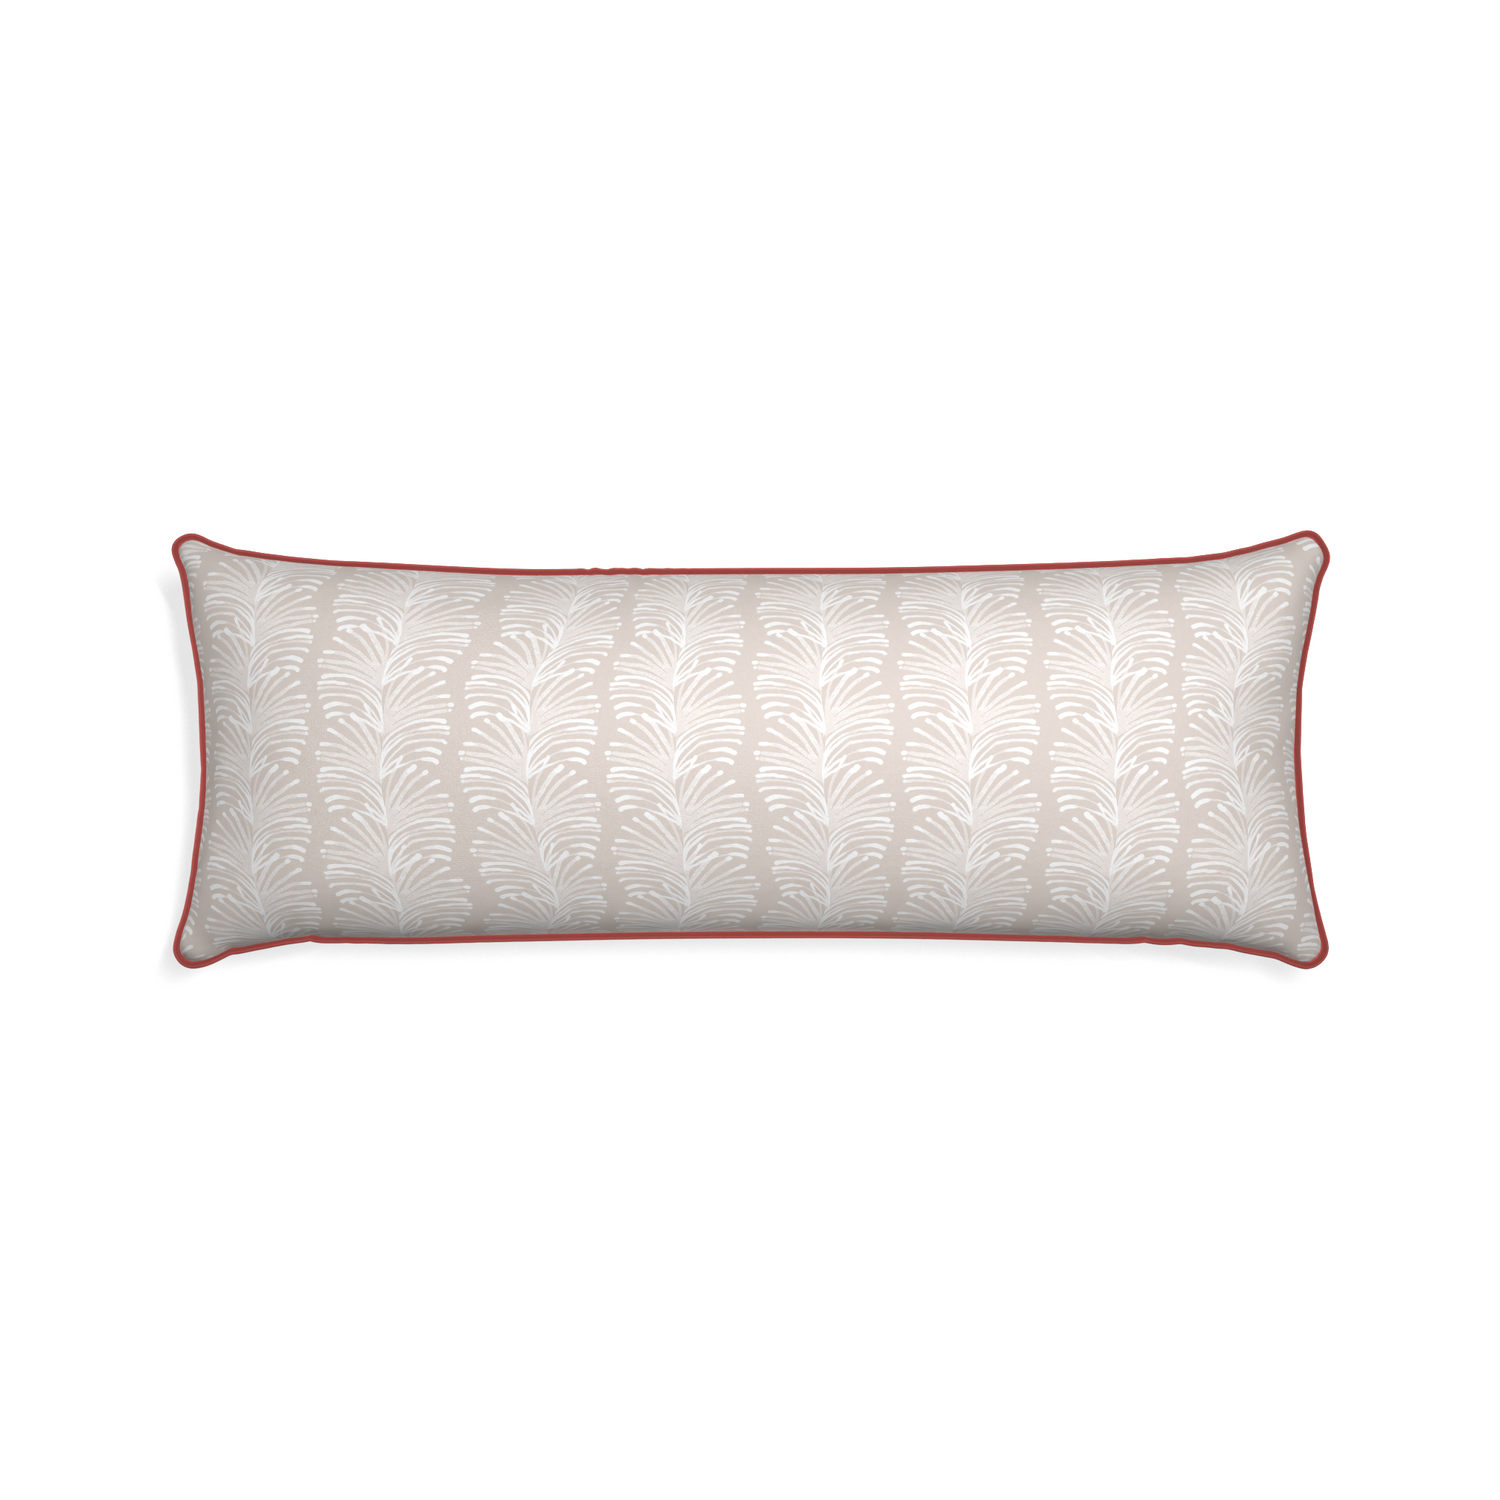 Xl-lumbar emma sand custom sand colored botanical stripepillow with c piping on white background